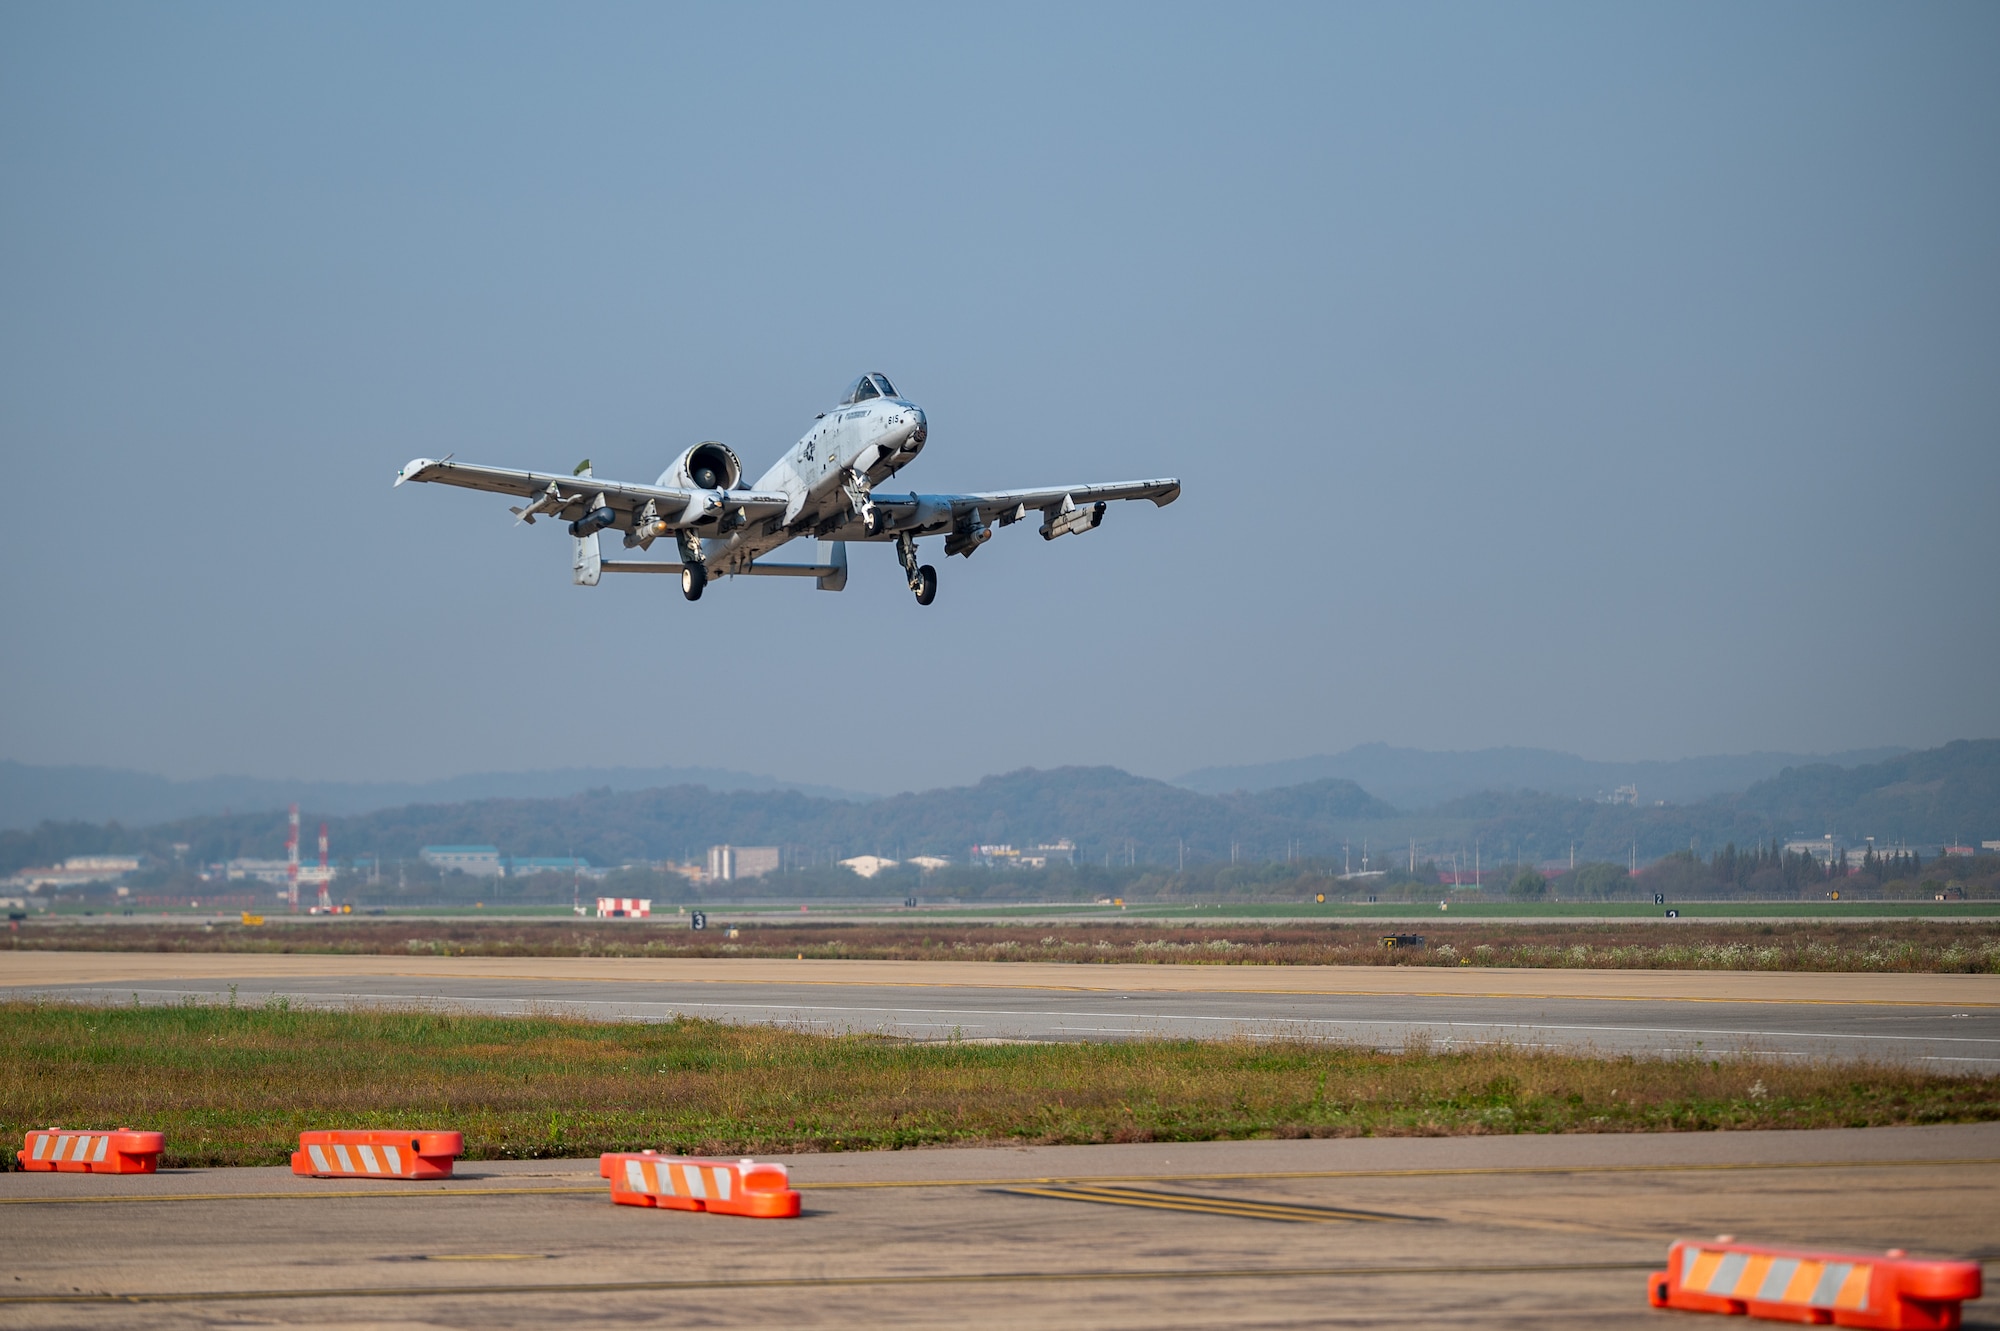 A U.S. Air Force A-10C Thunderbolt II takes off using an alternate landing strip during Vigilant Defense 24 at Osan Air Base, Republic of Korea, Oct. 30, 2023. In contingency environments, the ALS is activated when the main runway sustains heavy damage, which allows pilots to maintain readiness and continue flying operations. VD24 is a routine training event that tests the military capabilities across the peninsula, allowing combined and joint training at both the operational and tactical levels. Training is conducted throughout the year to generate combat airpower at a moment’s notice, affirming the commitment to the ROK remains ironclad and ensures regional stability throughout the Indo-Pacific. (U.S. Air Force photo by Staff Sgt. Thomas Sjoberg)